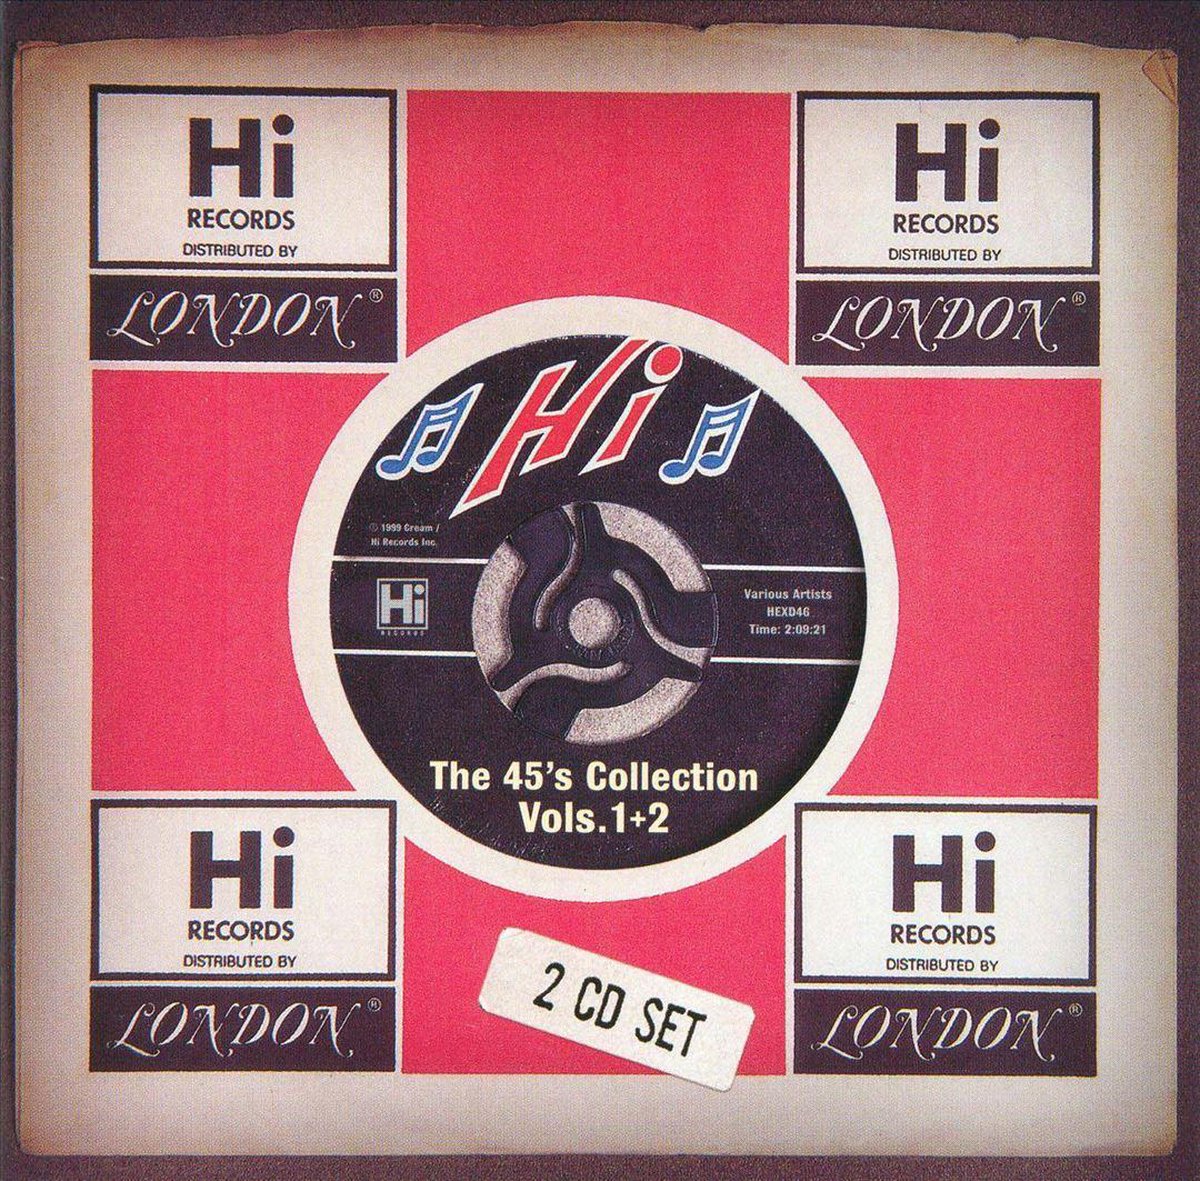 Hi Records: The 45's Collection Vols.1-2 - various artists